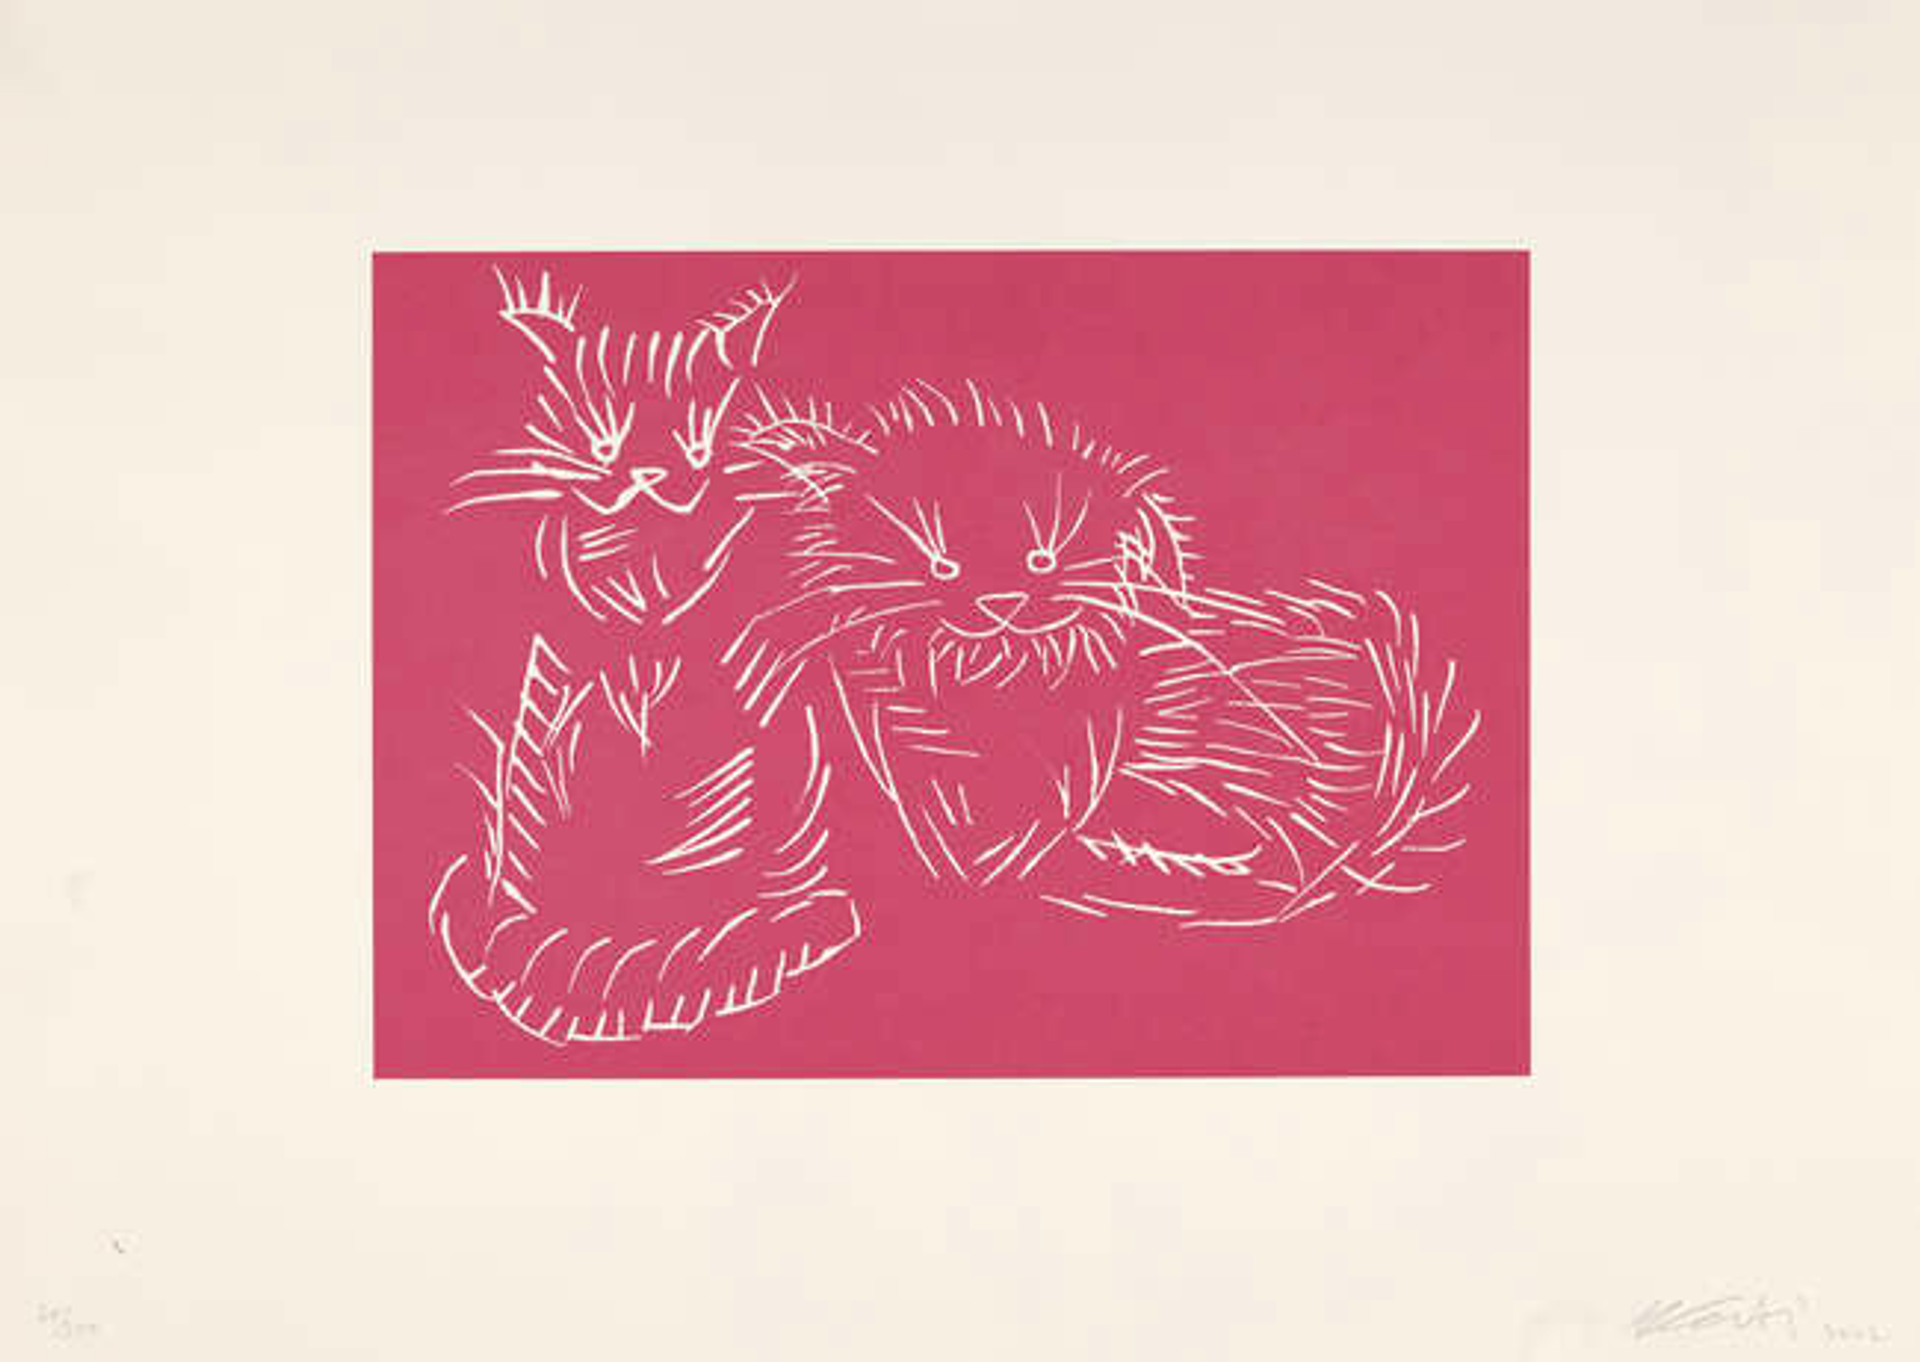 Two cats sketched in white on a deep pink background.